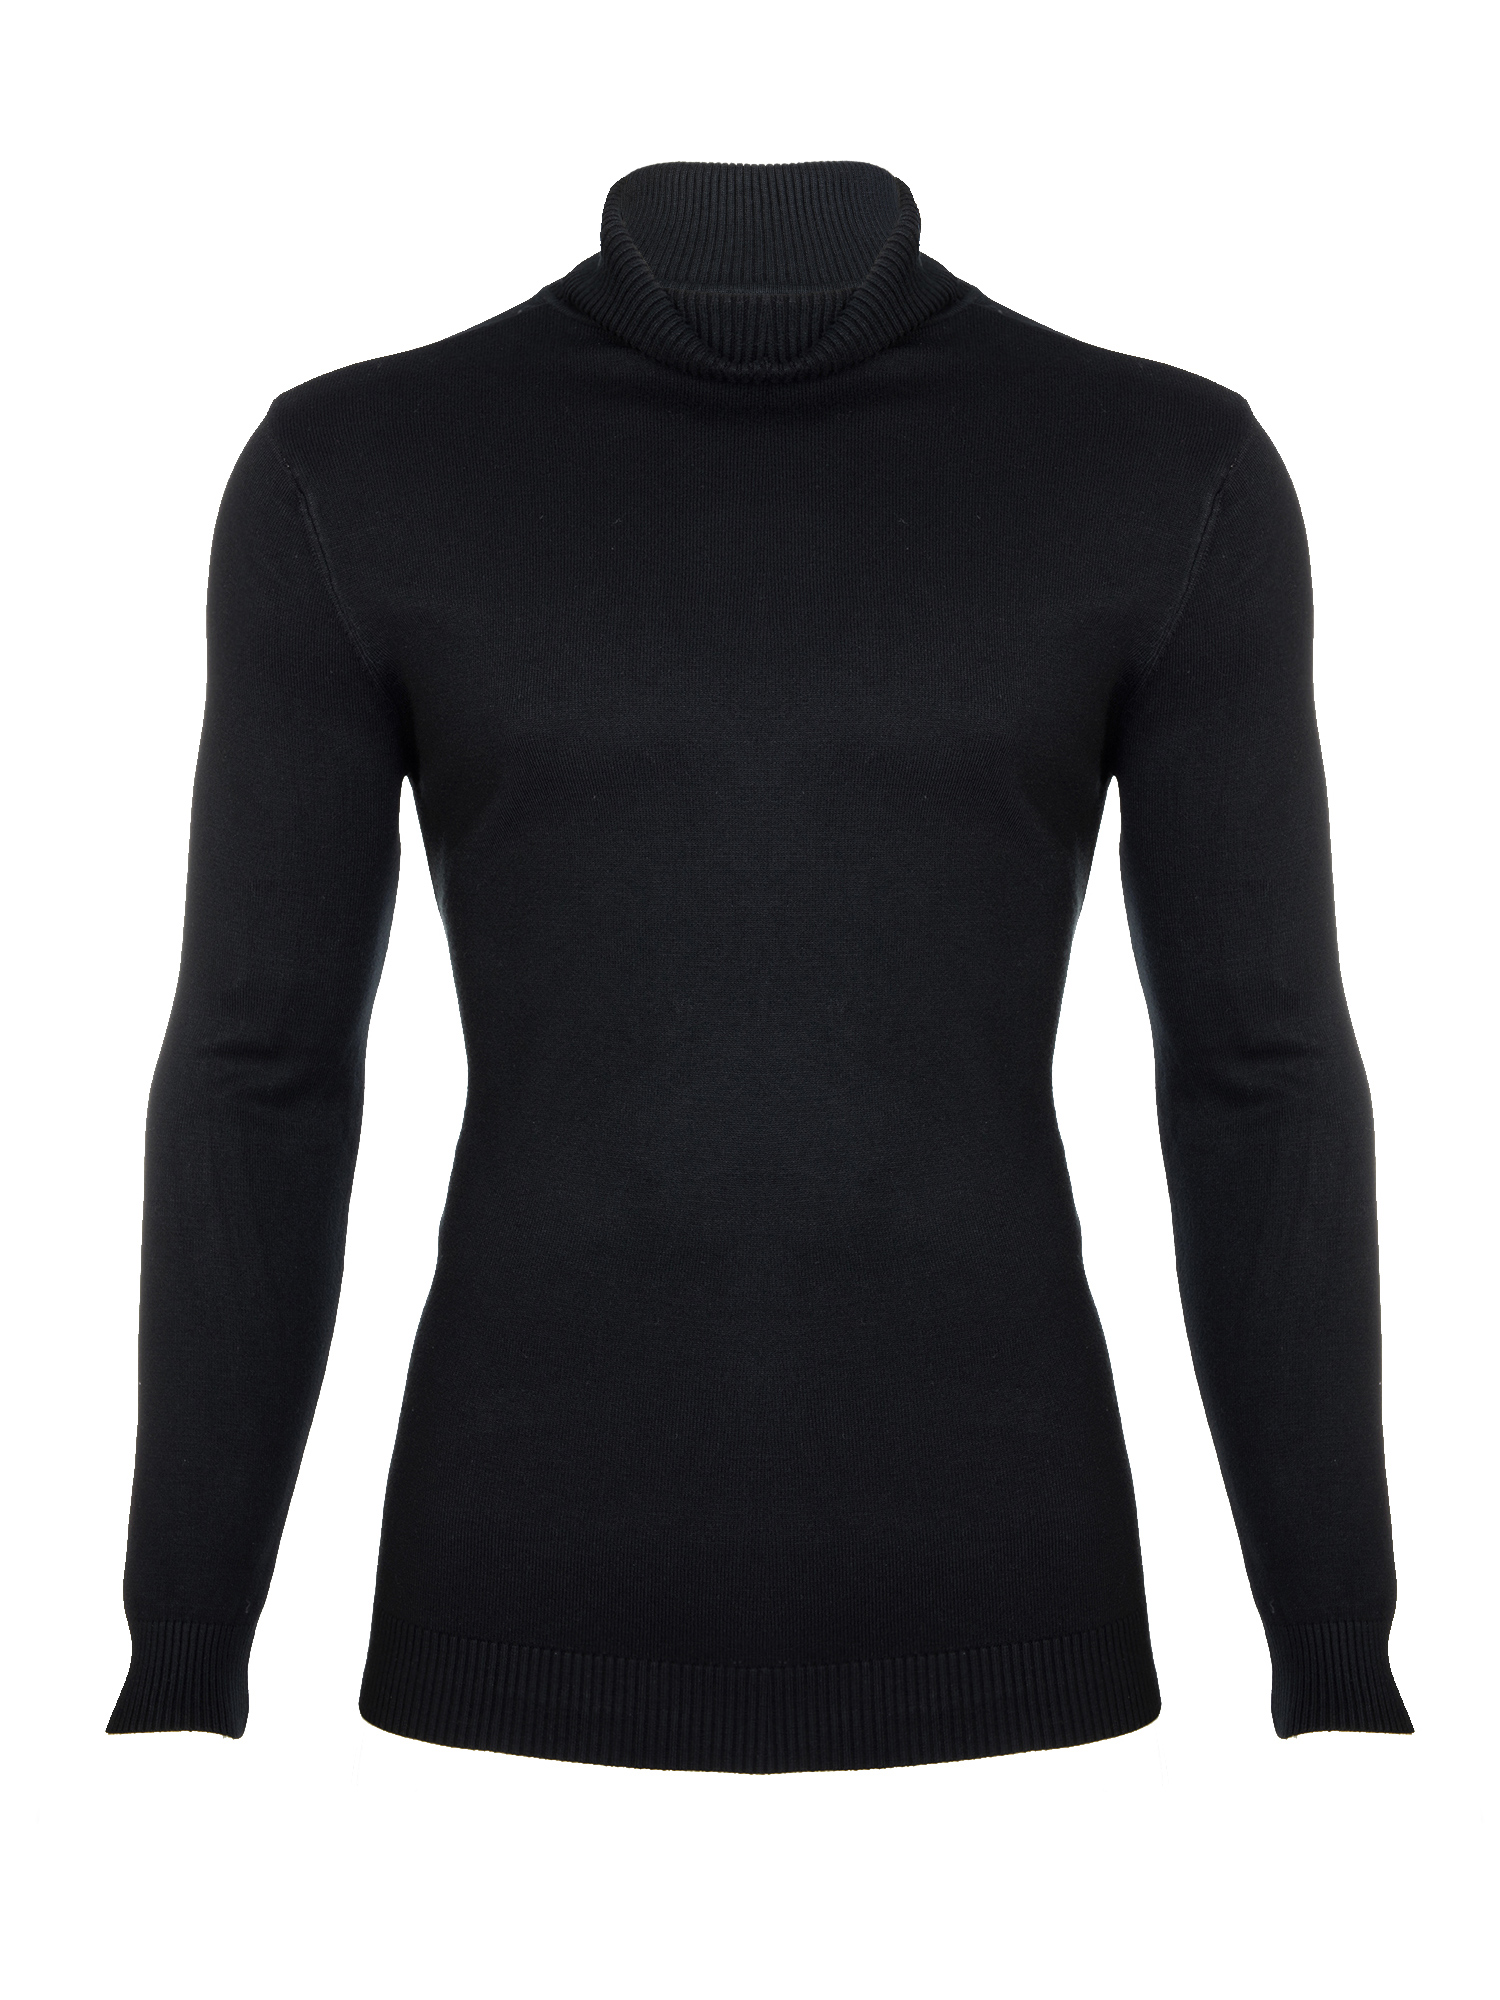 Turtleneck Sweaters for Men's Knitted Pullover Long Sleeve Sweaters Slim Fit Lightweight Sweatshirt Casual Turtle Neck Sweaters - image 1 of 8